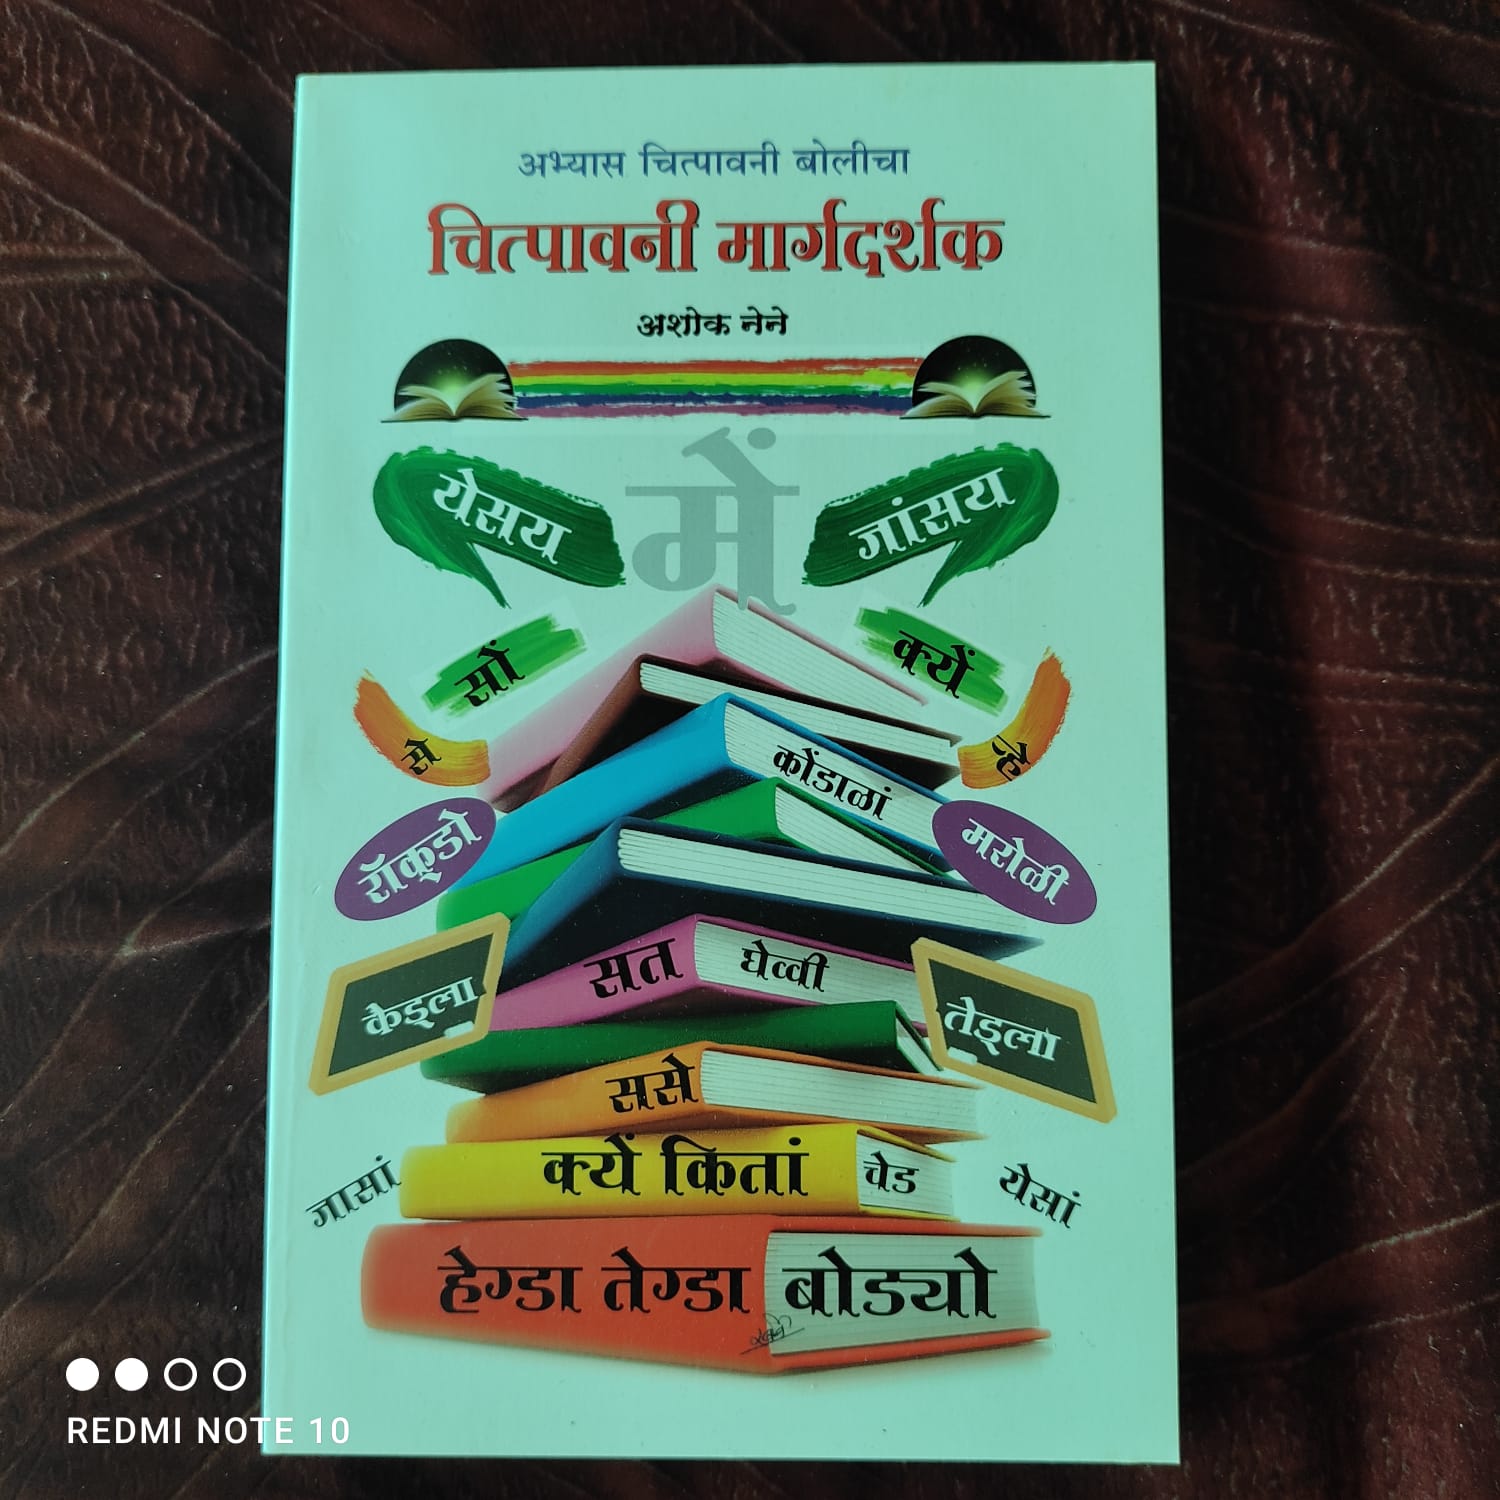 A linguistic guide for learning Chitpavni Boli